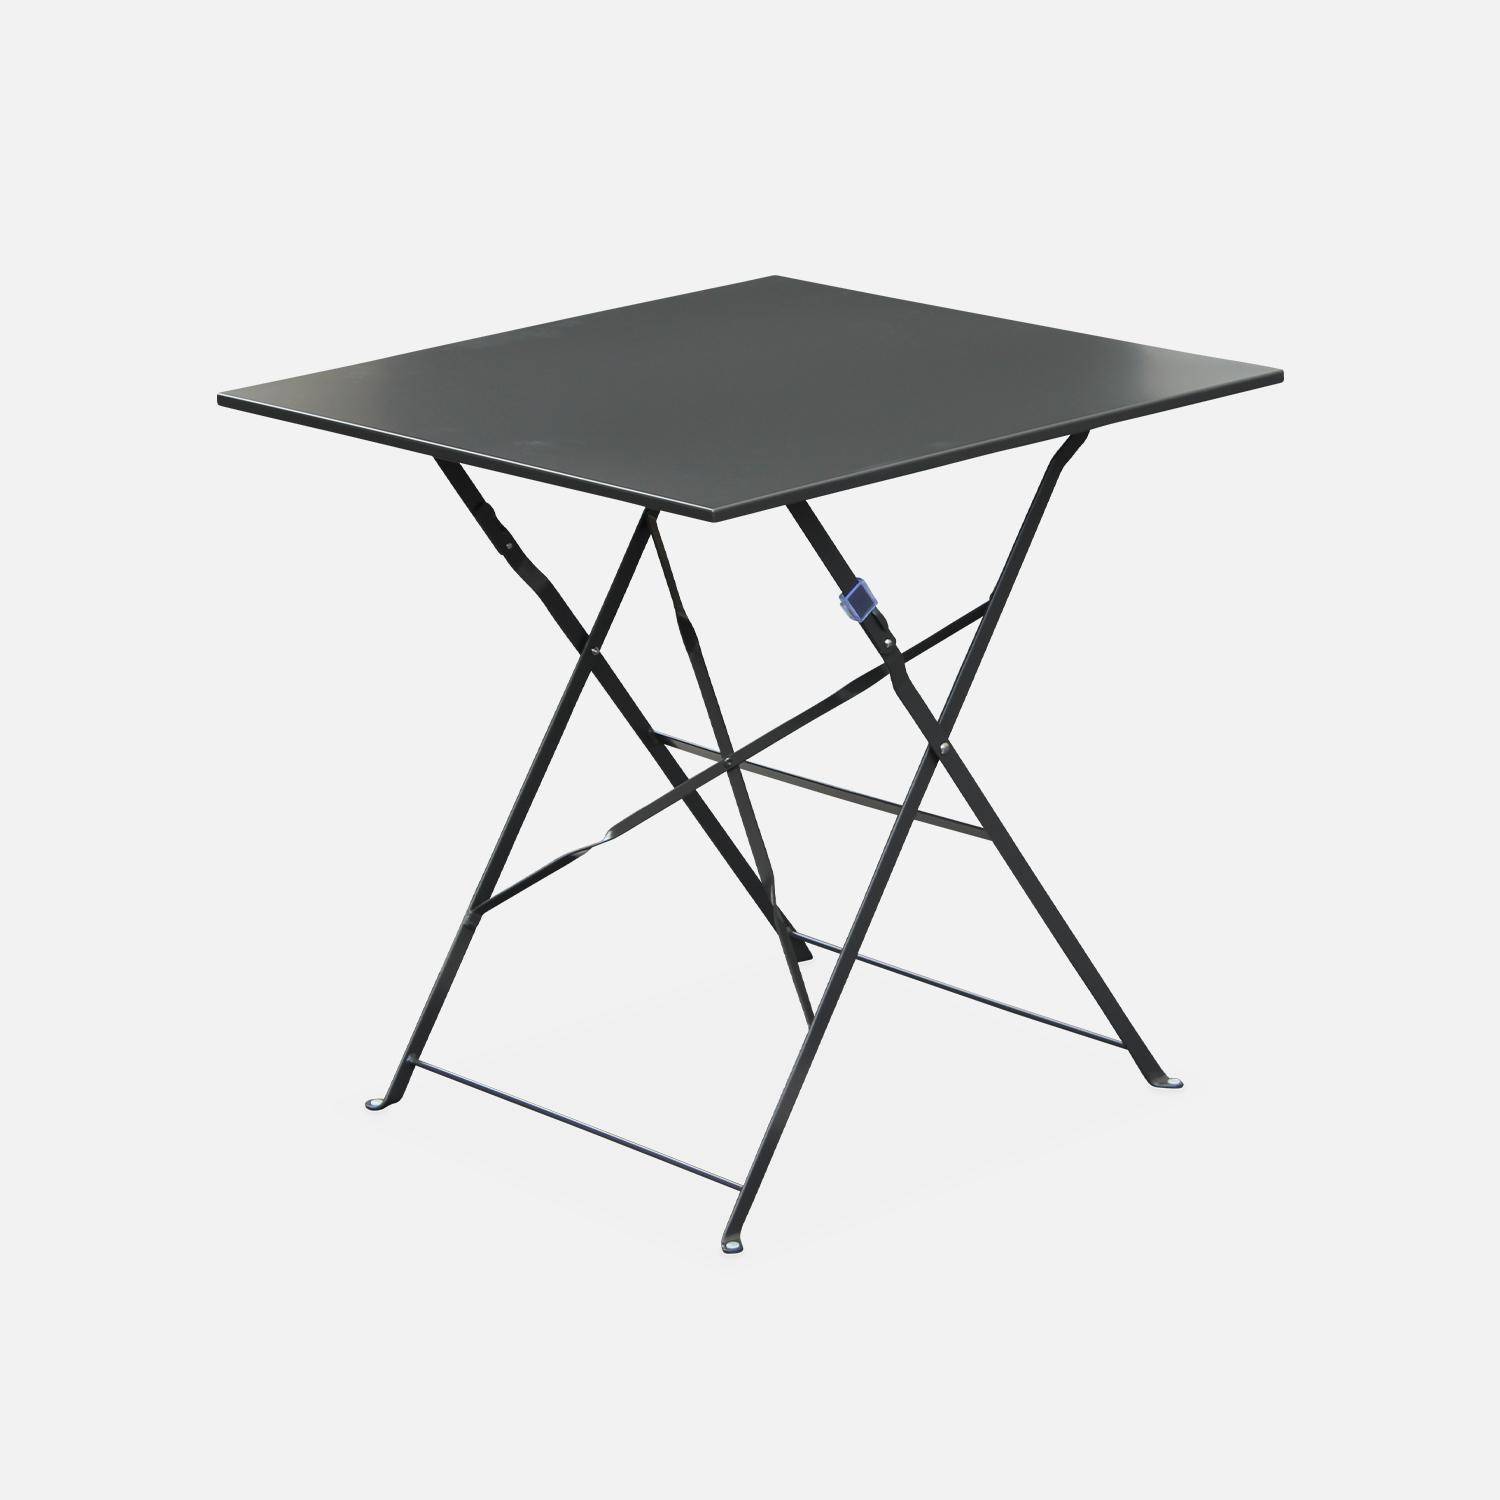 2-seater foldable thermo-lacquered steel bistro garden table, 70x70cm - Emilia - Anthracite,sweeek,Photo2